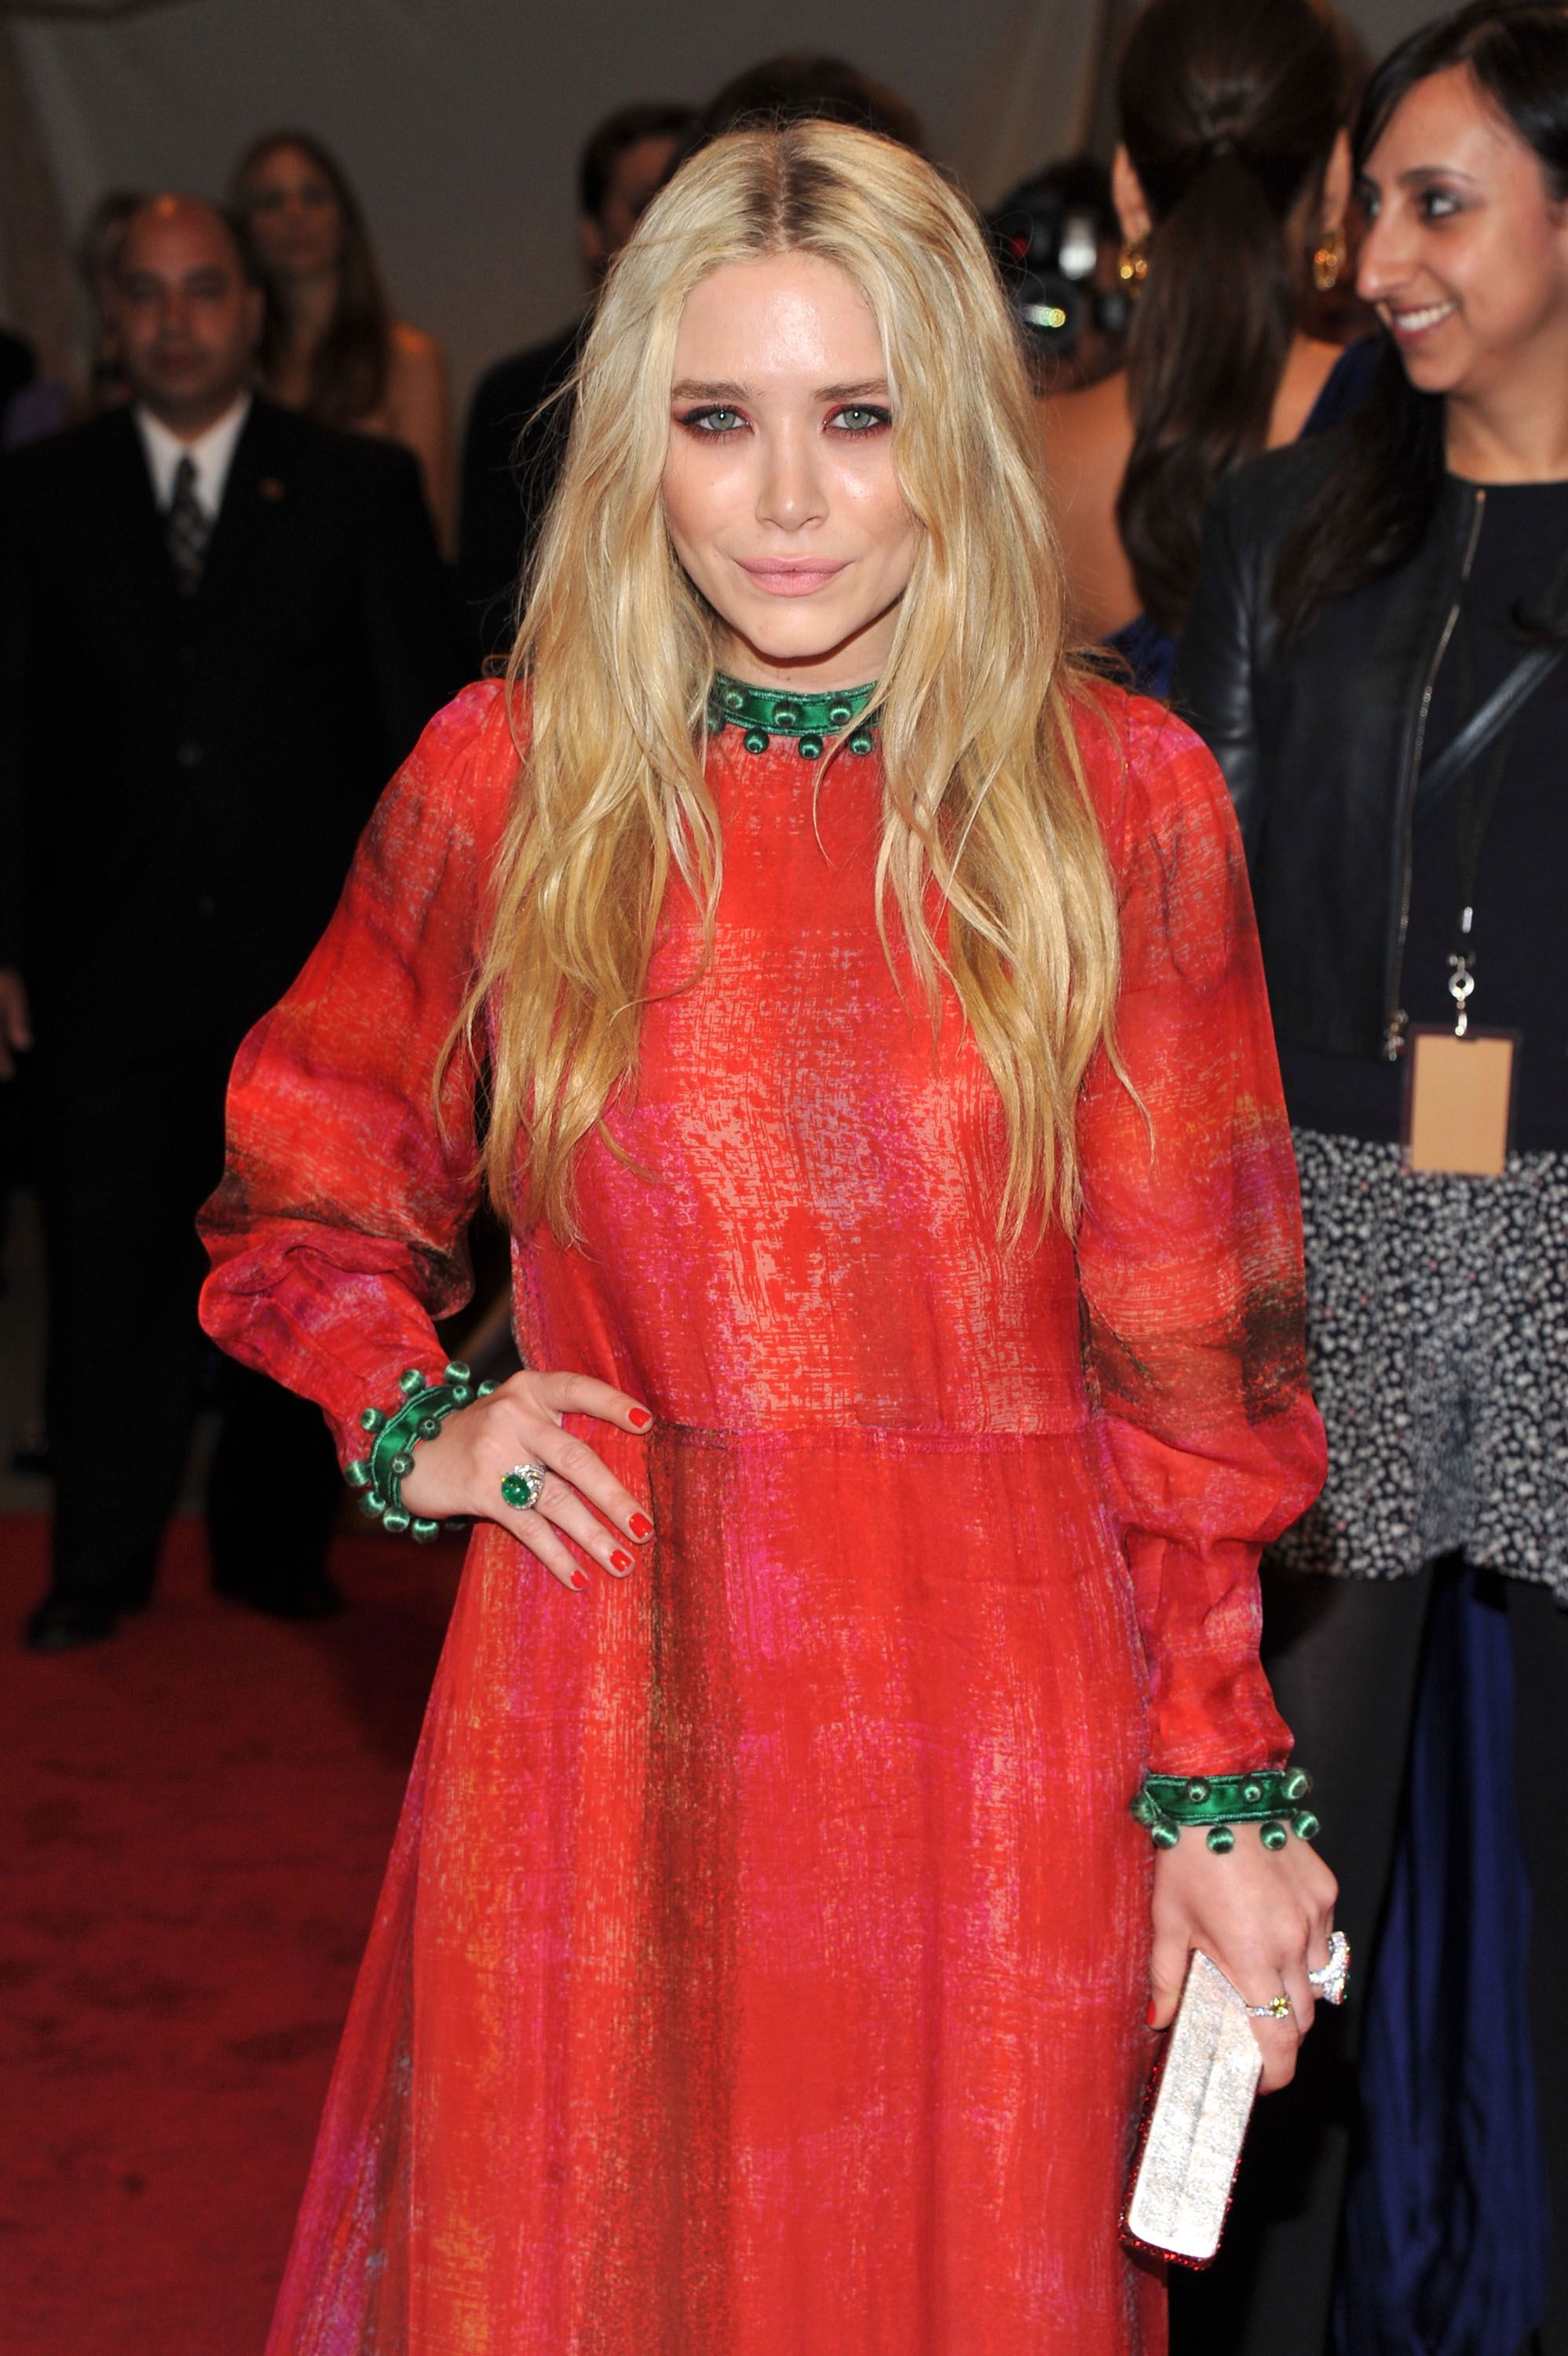 Mary-Kate Olsen during the "Alexander McQueen: Savage Beauty" Costume Institute Gala at The Metropolitan Museum of Art on May 2, 2011 in New York City | Source: Getty Images